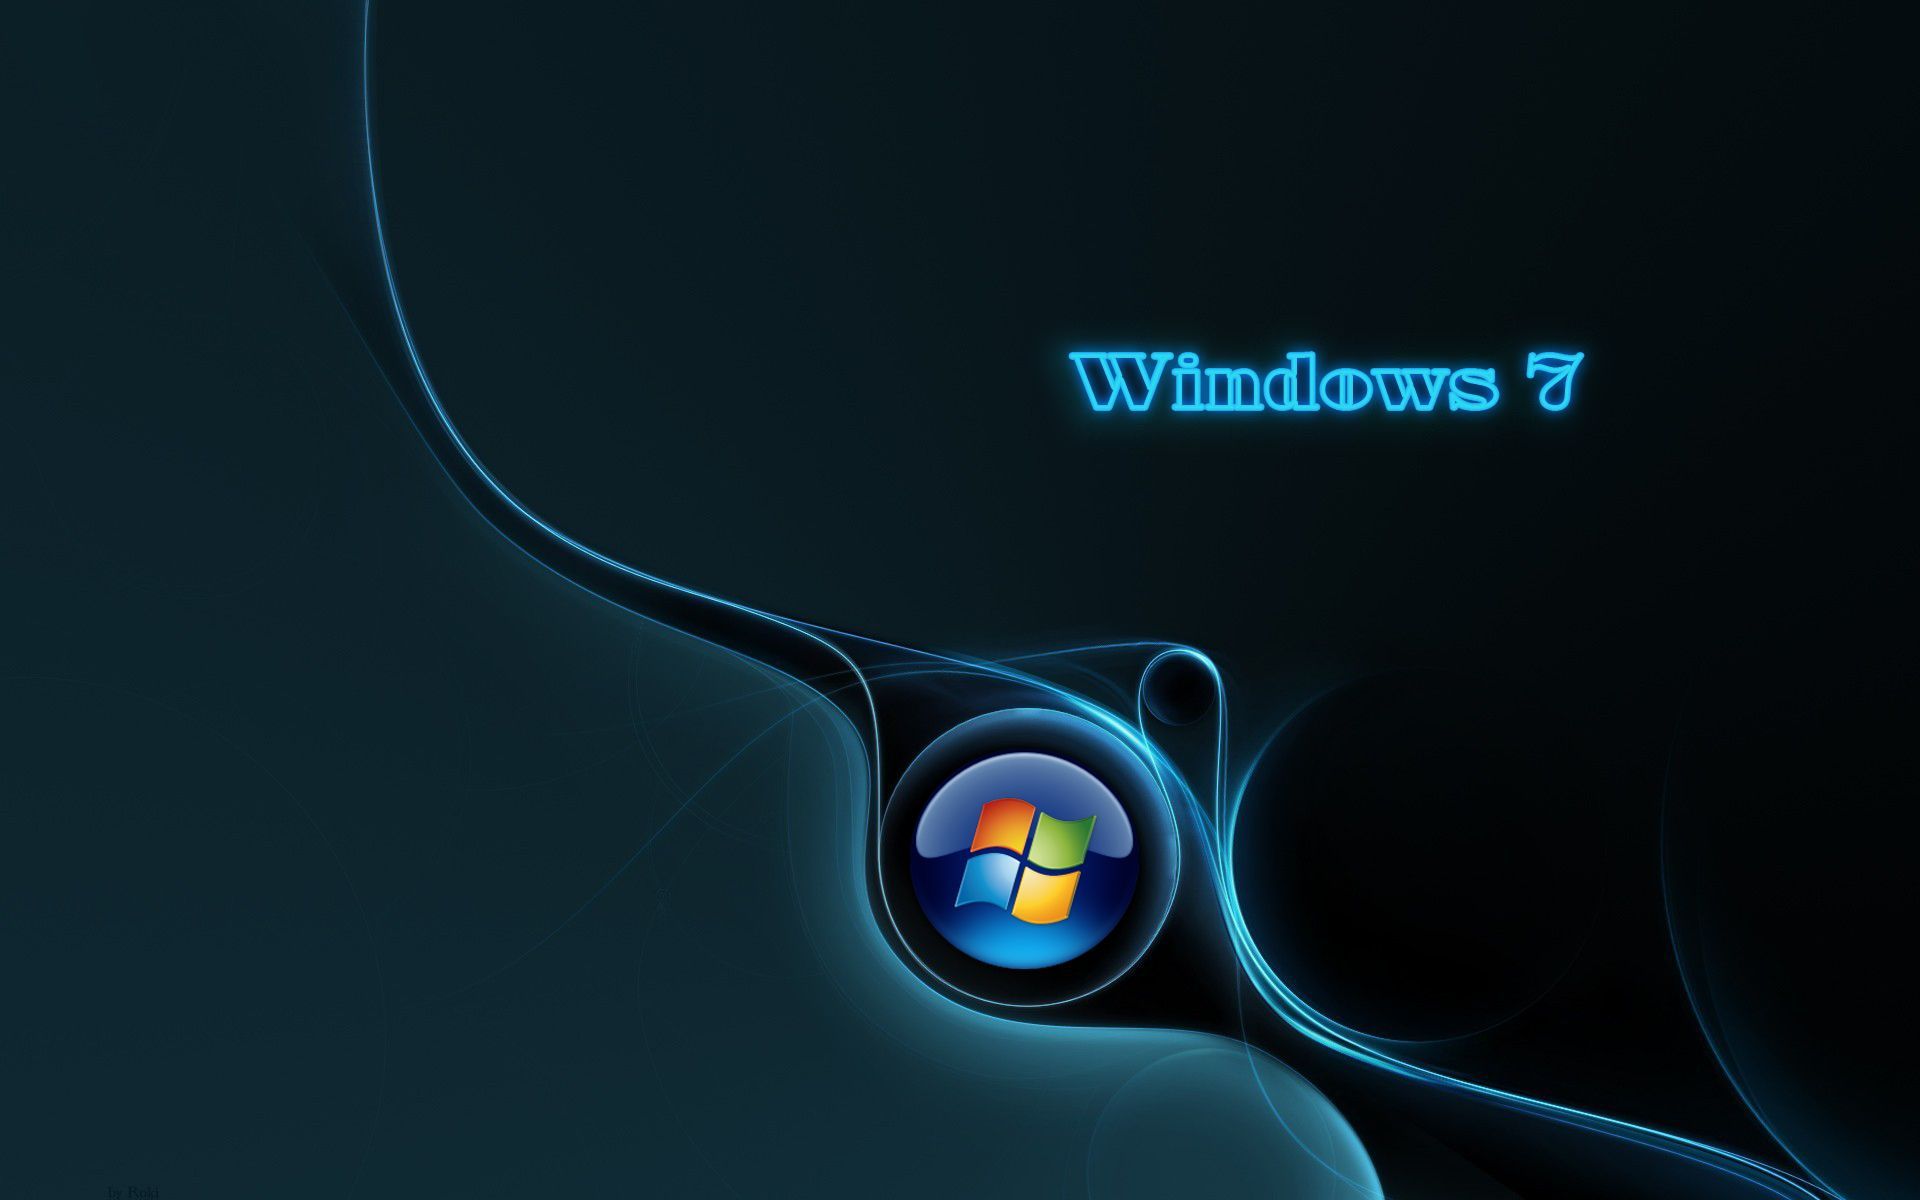 Top Window 7 HD Wallpapers - HD Images New